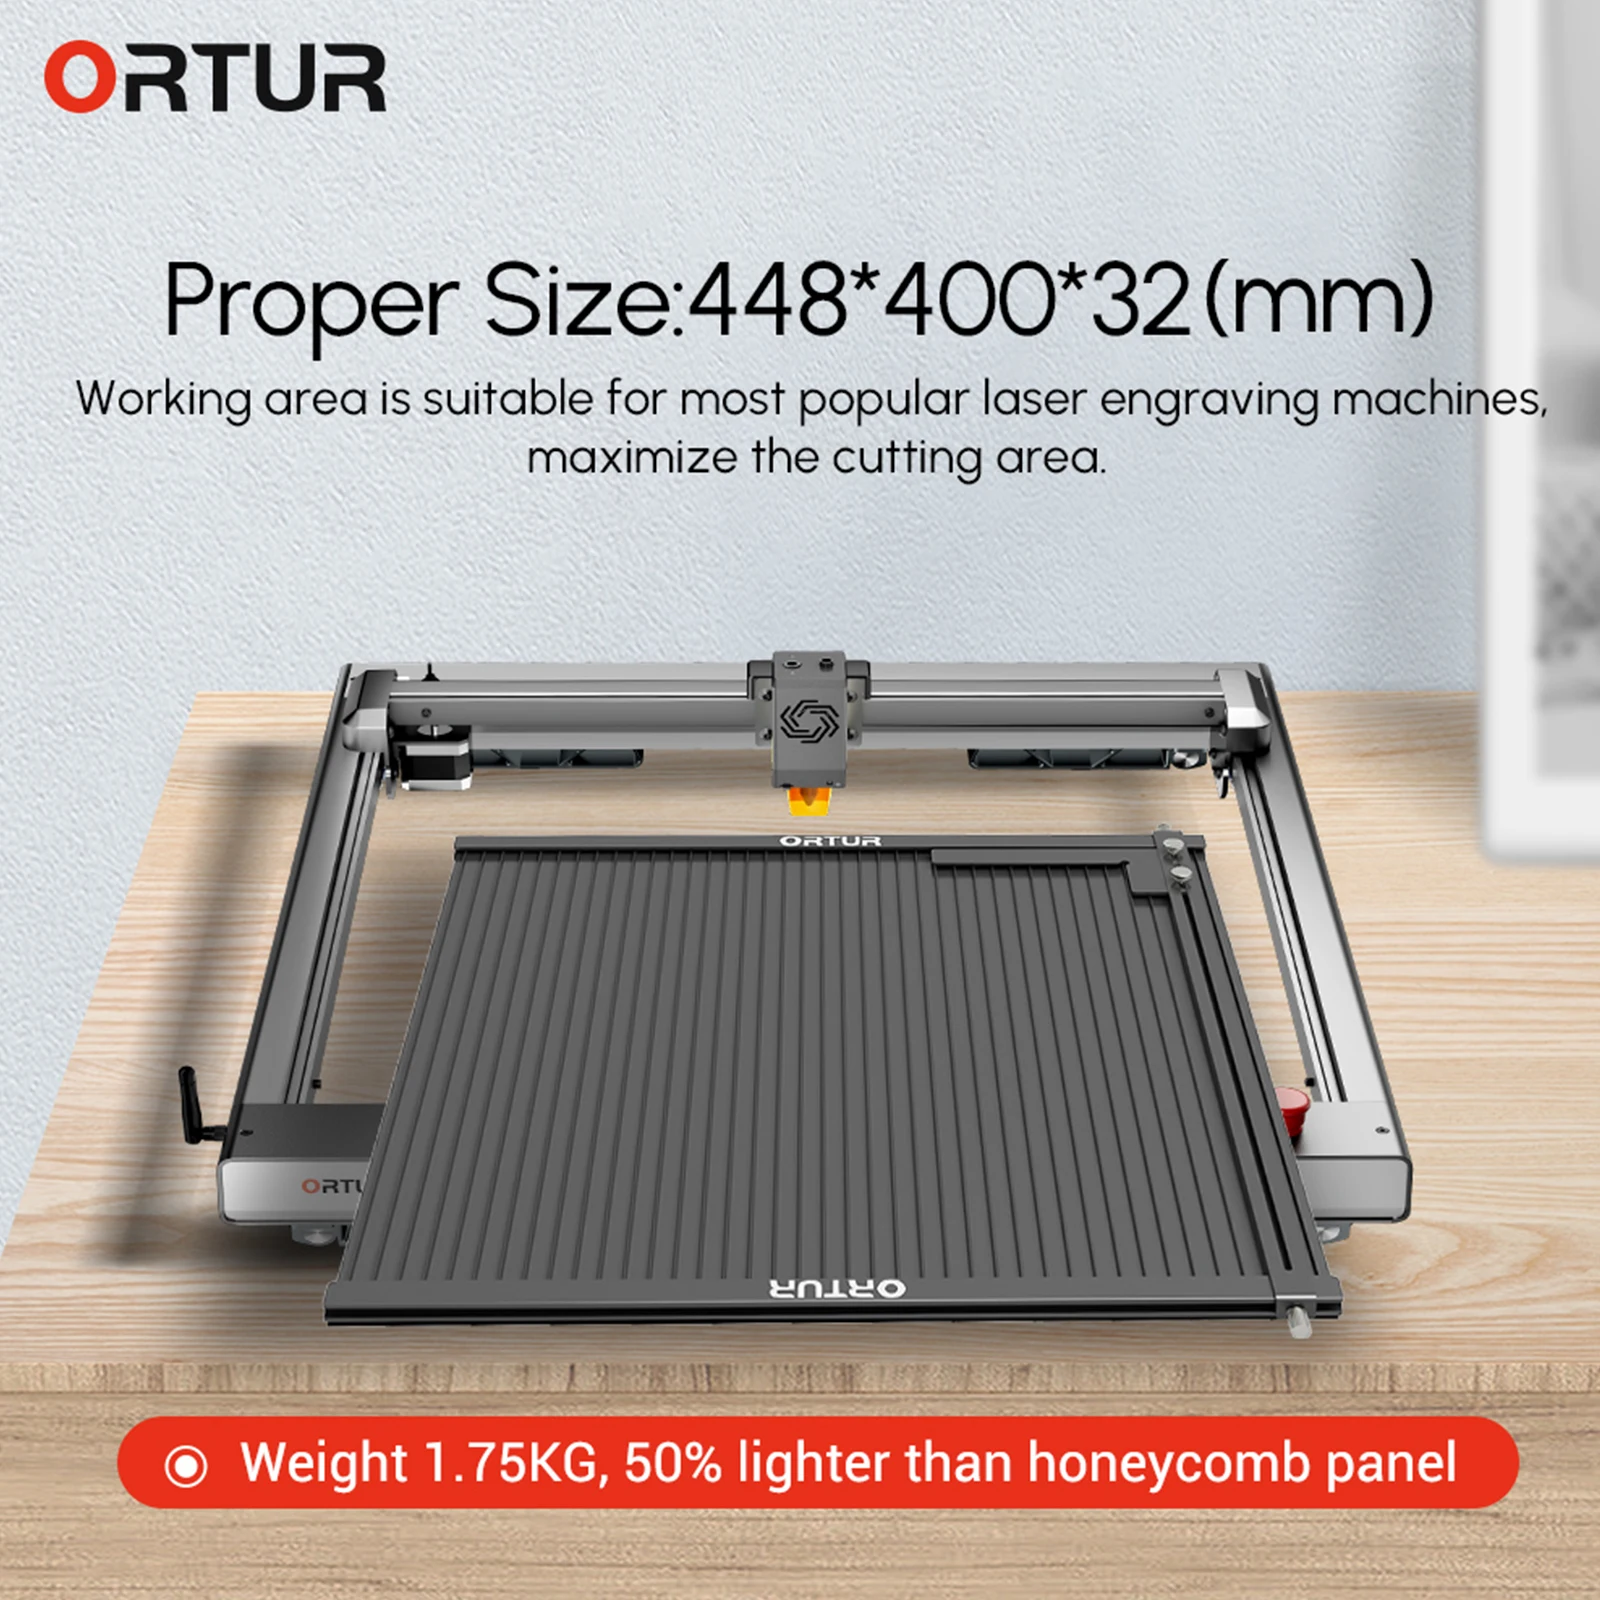 Portable Laser Cutting Aluminum Working Table Board Platform for CO2 Diode Laser Engraving Tools Acrylic Wood Cutting Platform enlarge